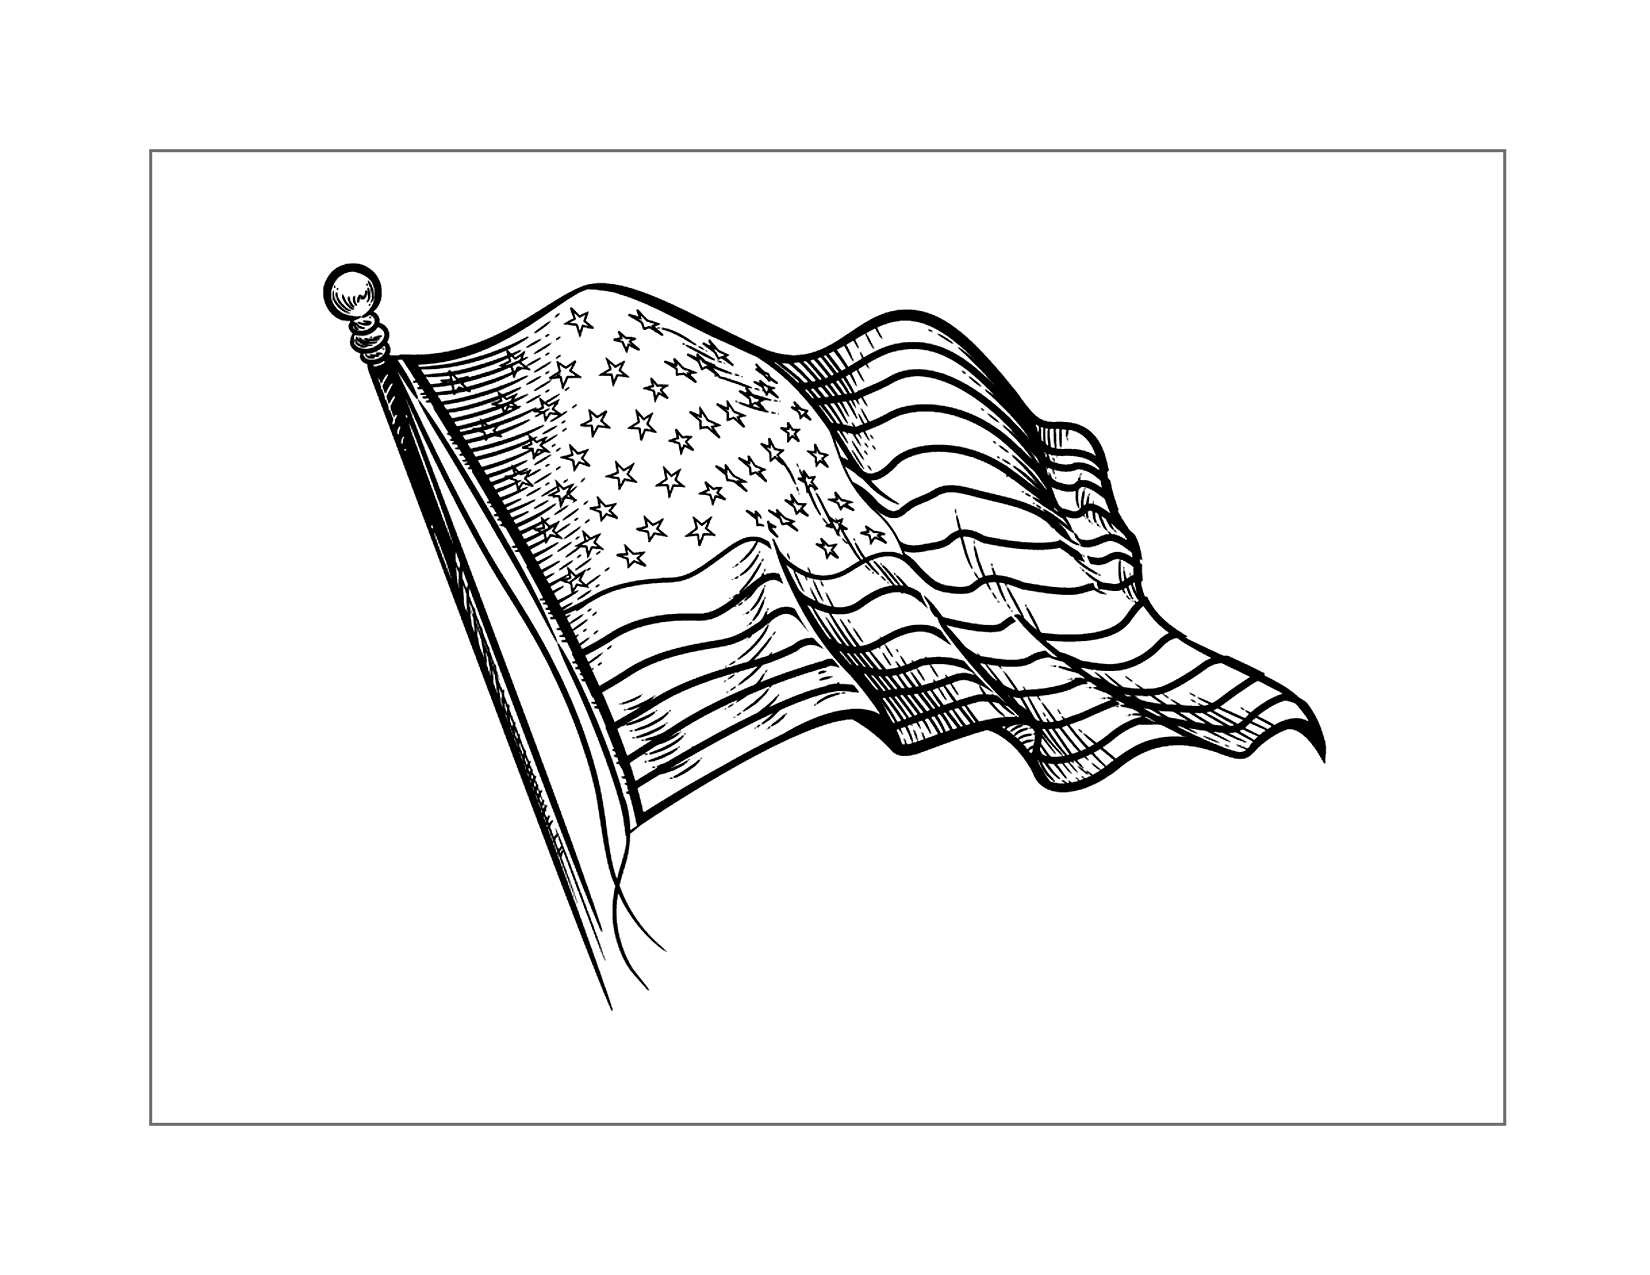 Waving American Flag Coloring Page